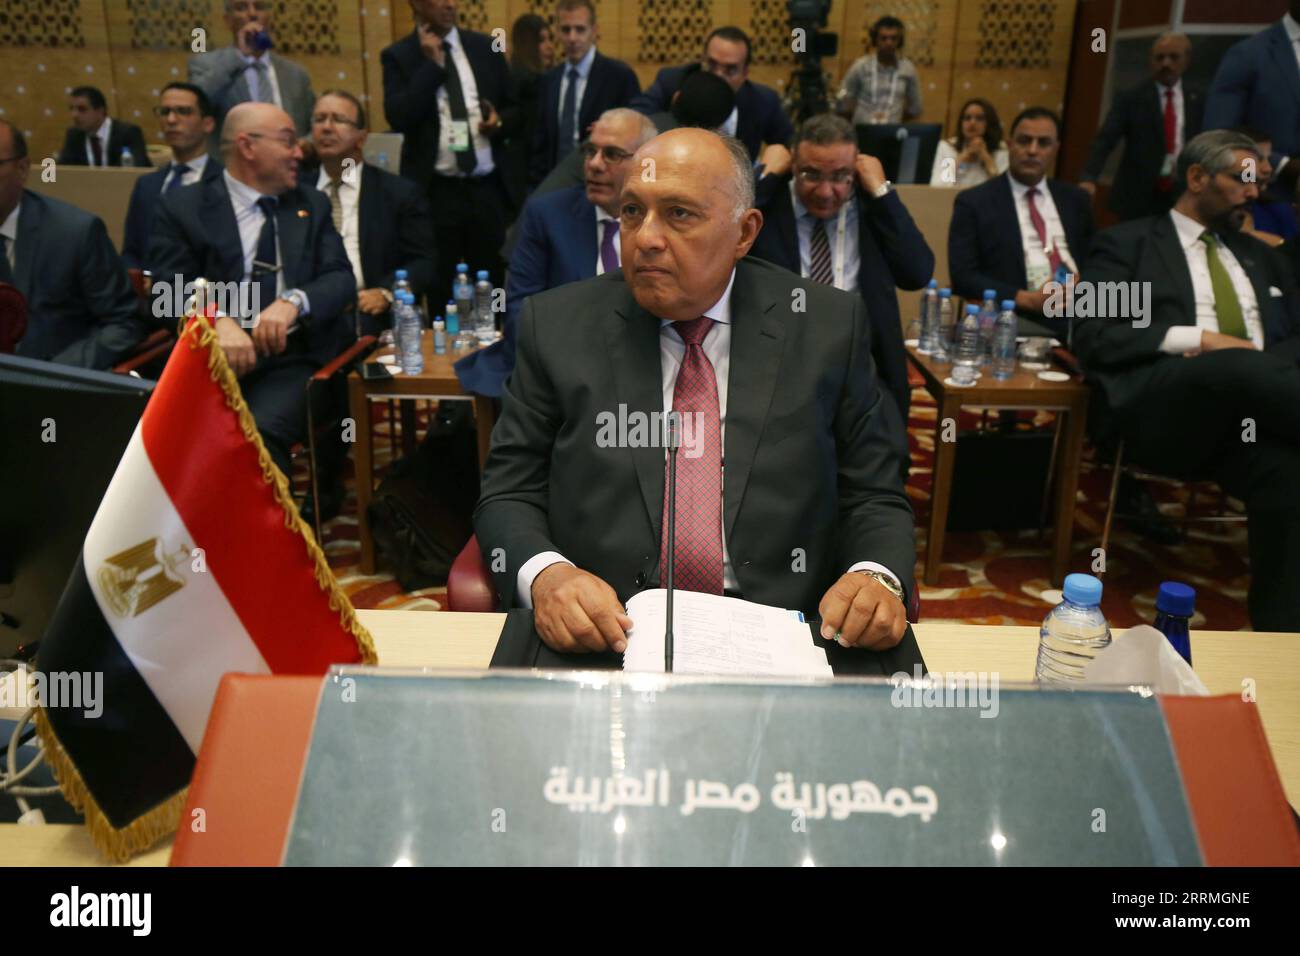 221030 -- ALGIERS, Oct. 30, 2022 -- Egyptian Foreign Minister Sameh Shoukry C attends the Arab foreign ministers preparatory meeting for the 31st Arab League summit in Algiers, Algeria, on Oct. 29, 2022. Secretary-General of the Arab League Ahmed Aboul-Gheit said here on Saturday that food security and the Palestinian issue will be on the top agenda of the Arab League Summit due on Nov. 1-2. TO GO WITH Food security, Palestinian issue to top agenda of Arab League Summit in Algeria ALGERIA-ALGIERS-ARAB LEAGUE-FM-PREPARATORY MEETING XinxHua PUBLICATIONxNOTxINxCHN Stock Photo